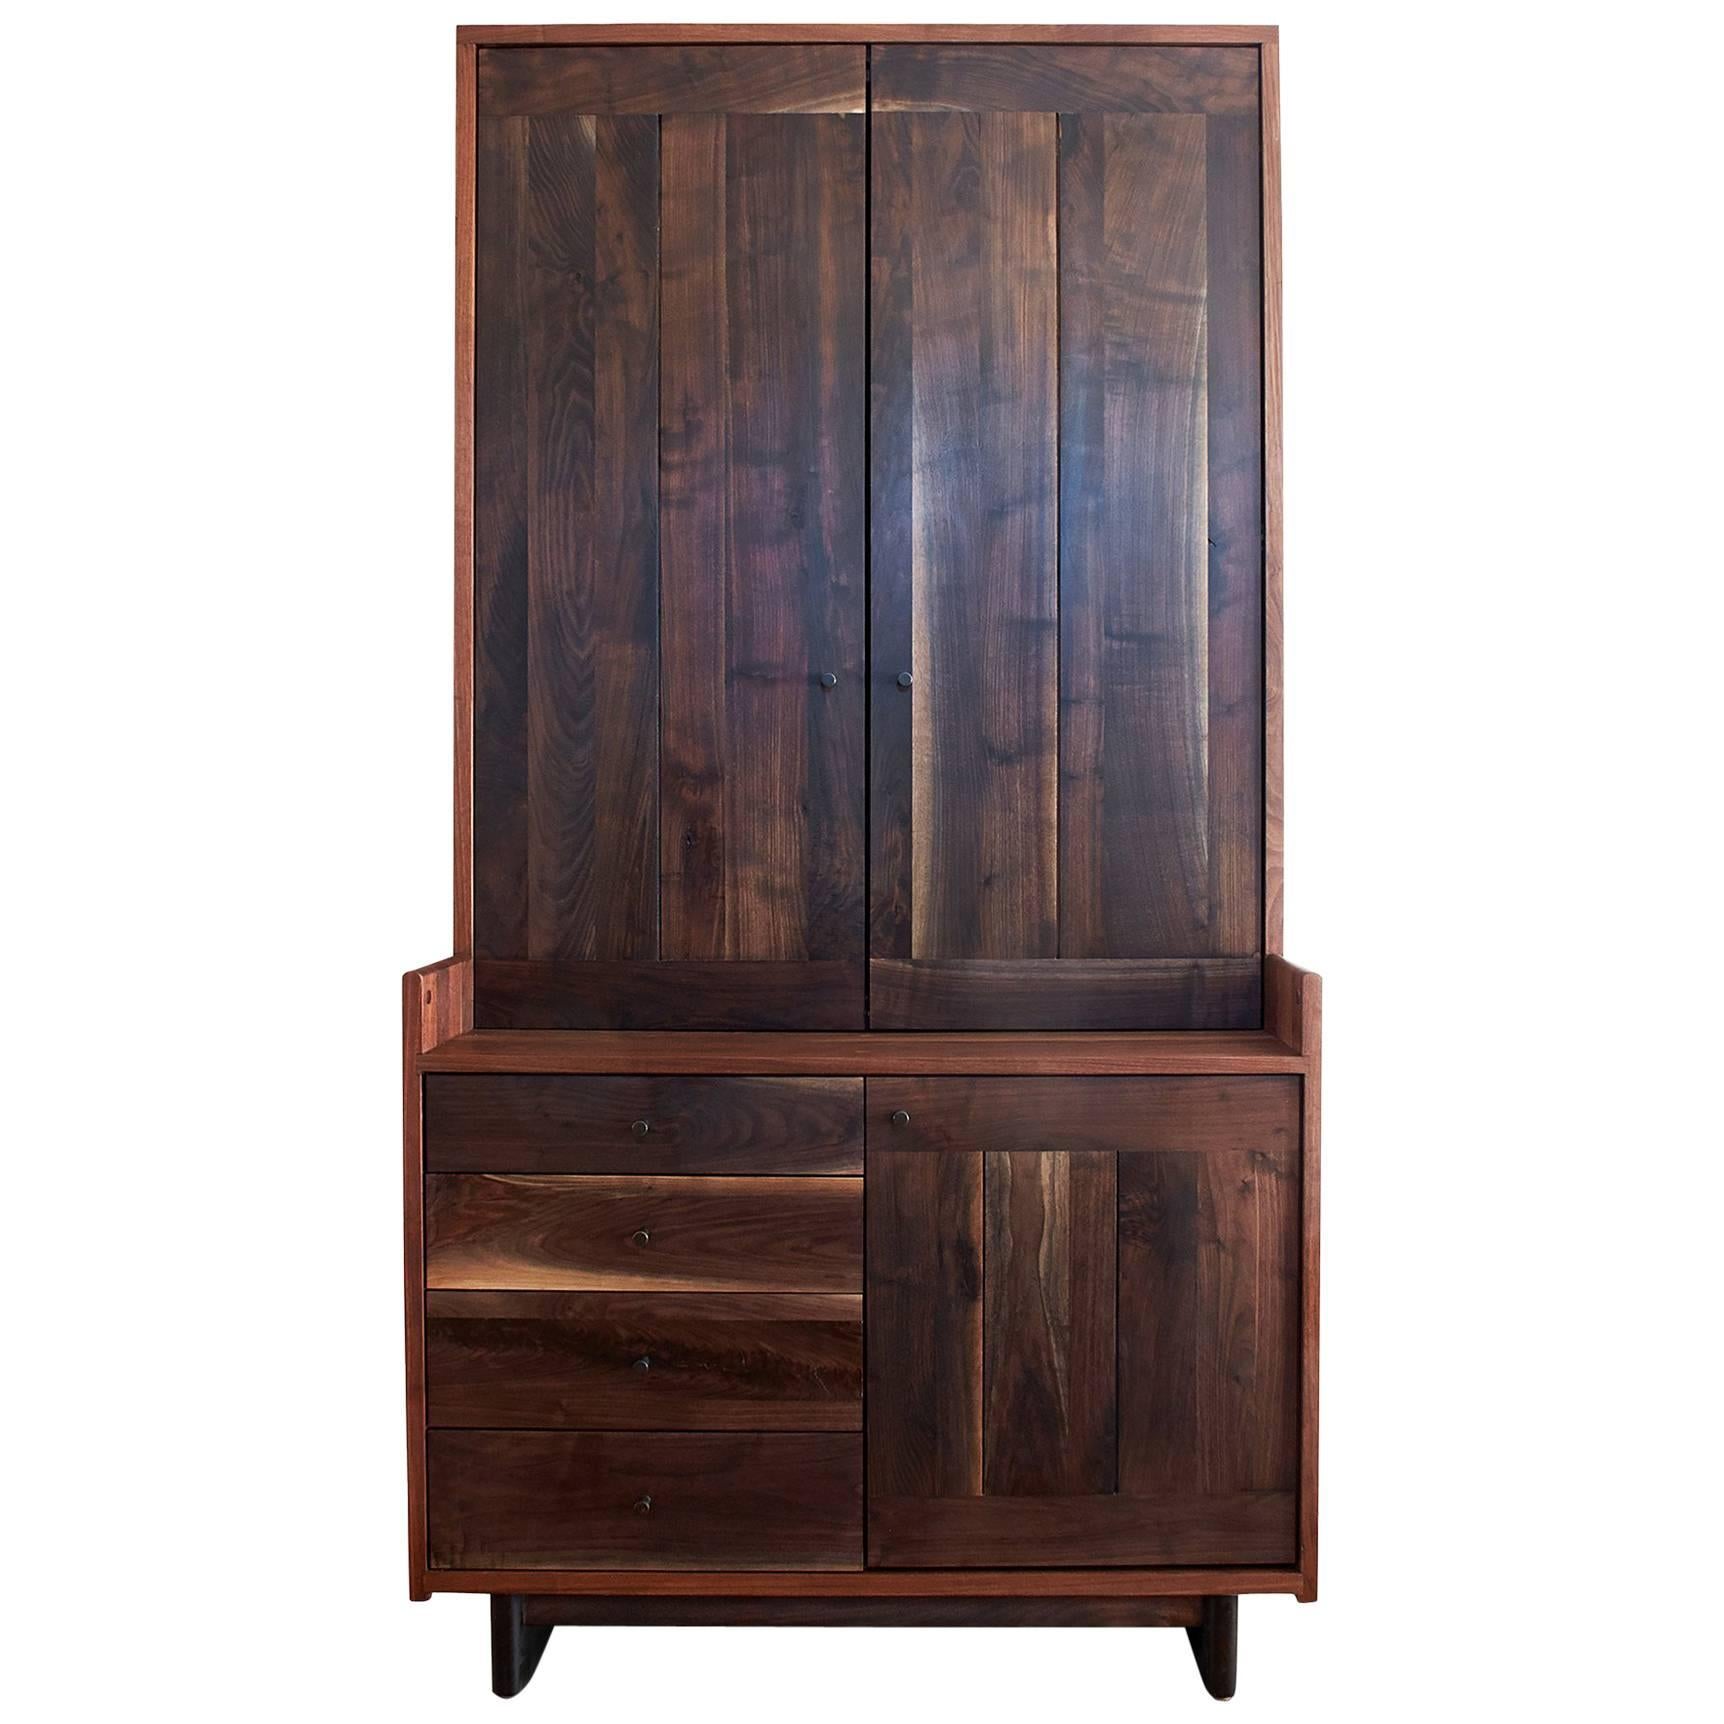 Lenox Pantry, Hutch Featuring Solid Hardwood and Brass Hardware For Sale